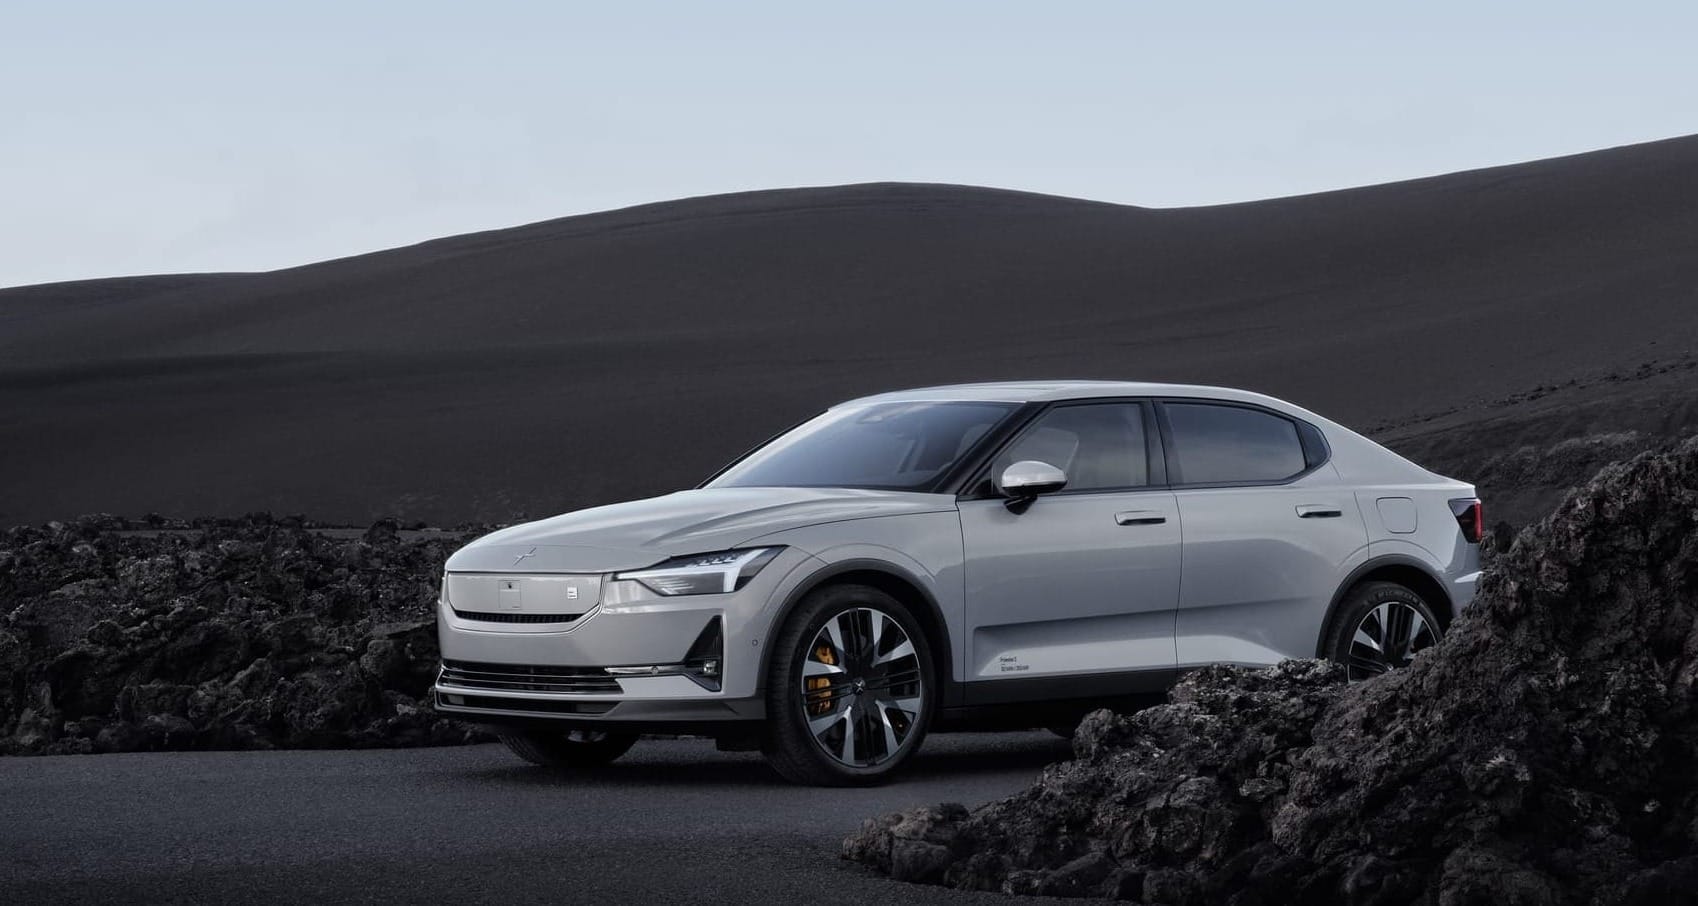 The New 2025 Polestar 2 Model Comes with Design Updates and Extended Range